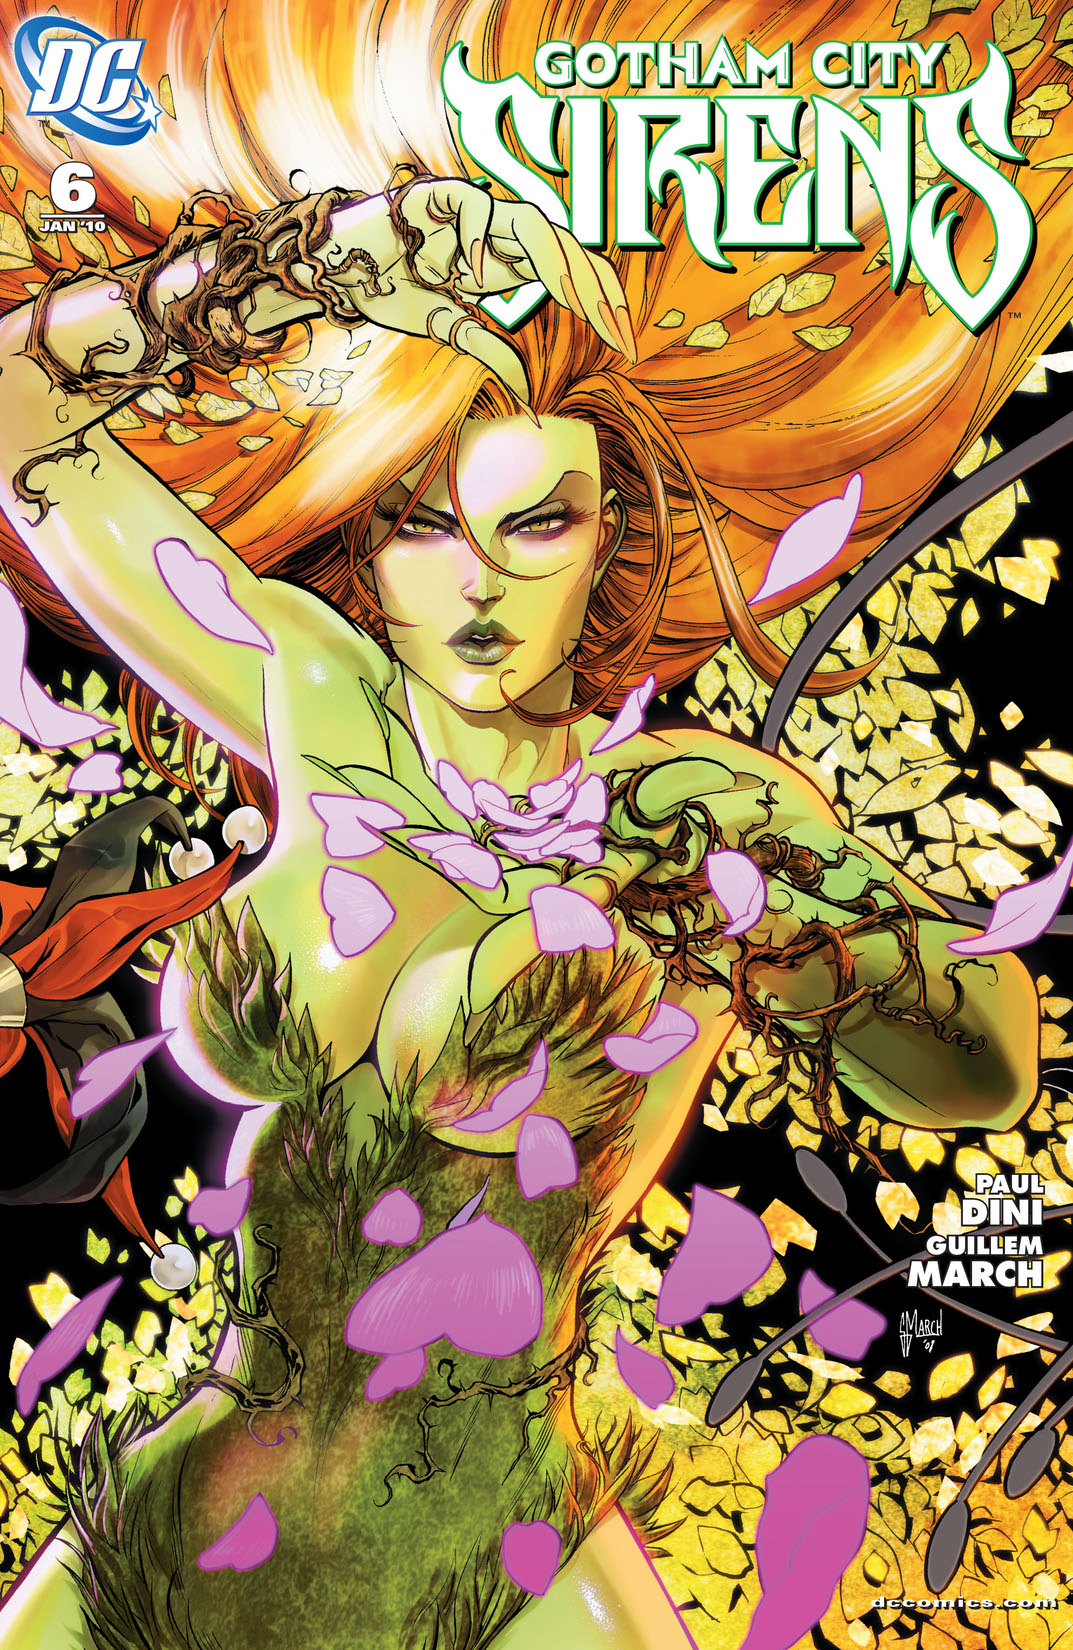 Gotham City Sirens #6 preview images